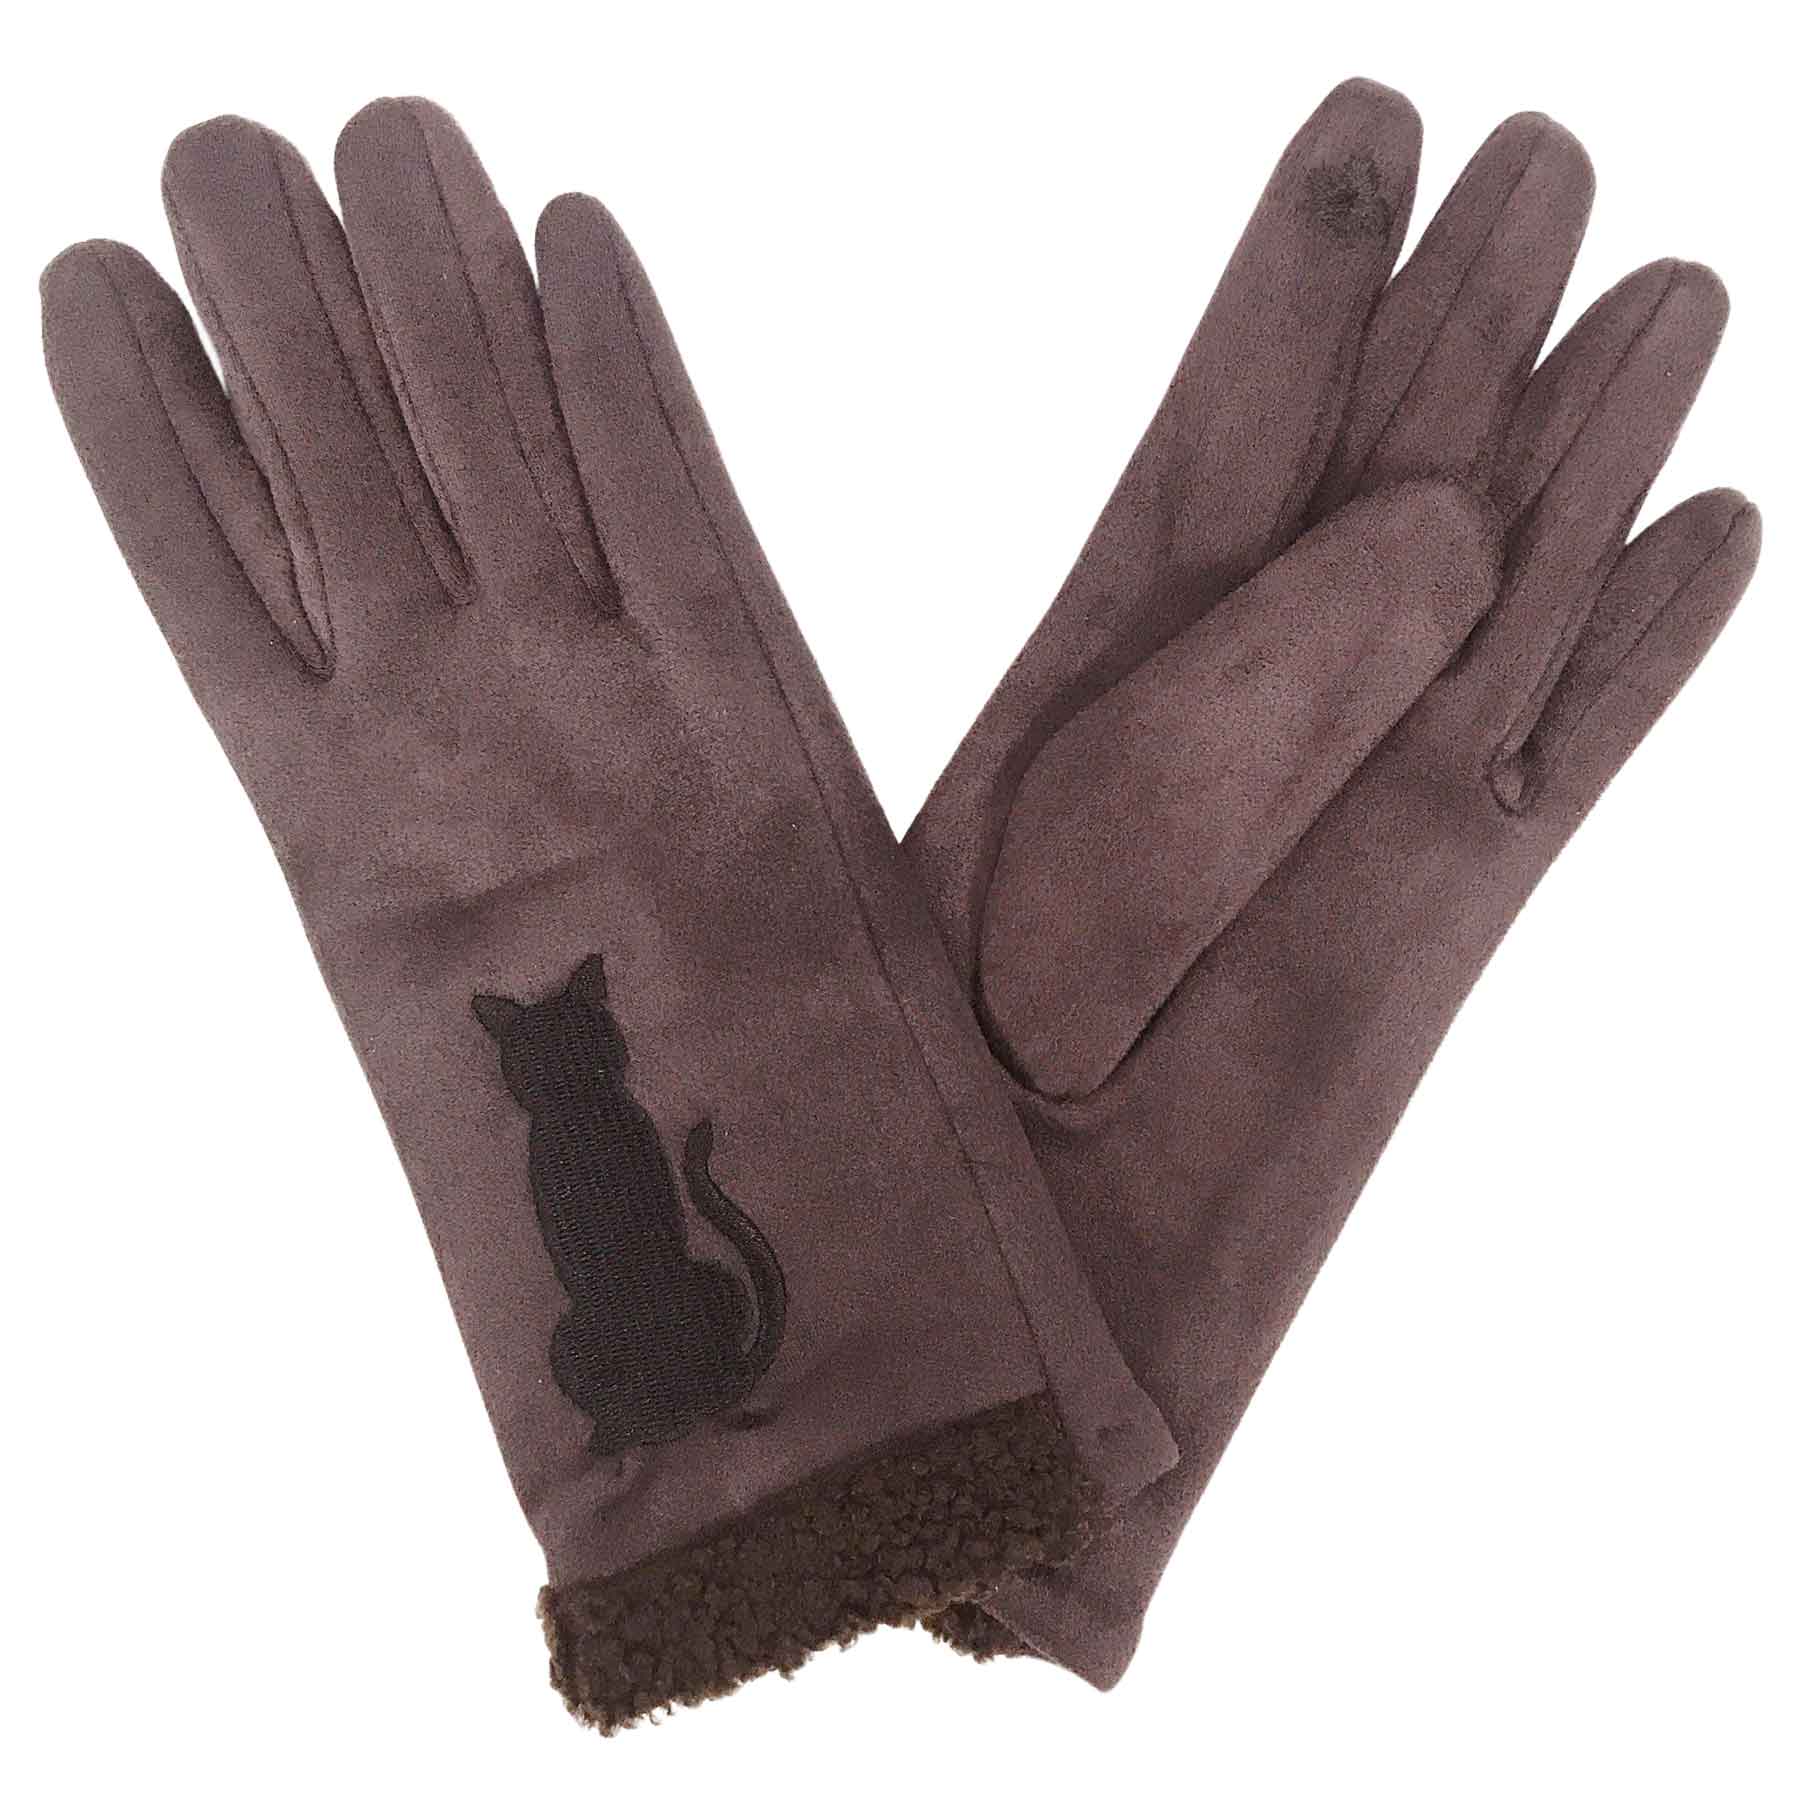 1229 - Brown Cat Silhouette <br>
Touch Screen Smart Gloves